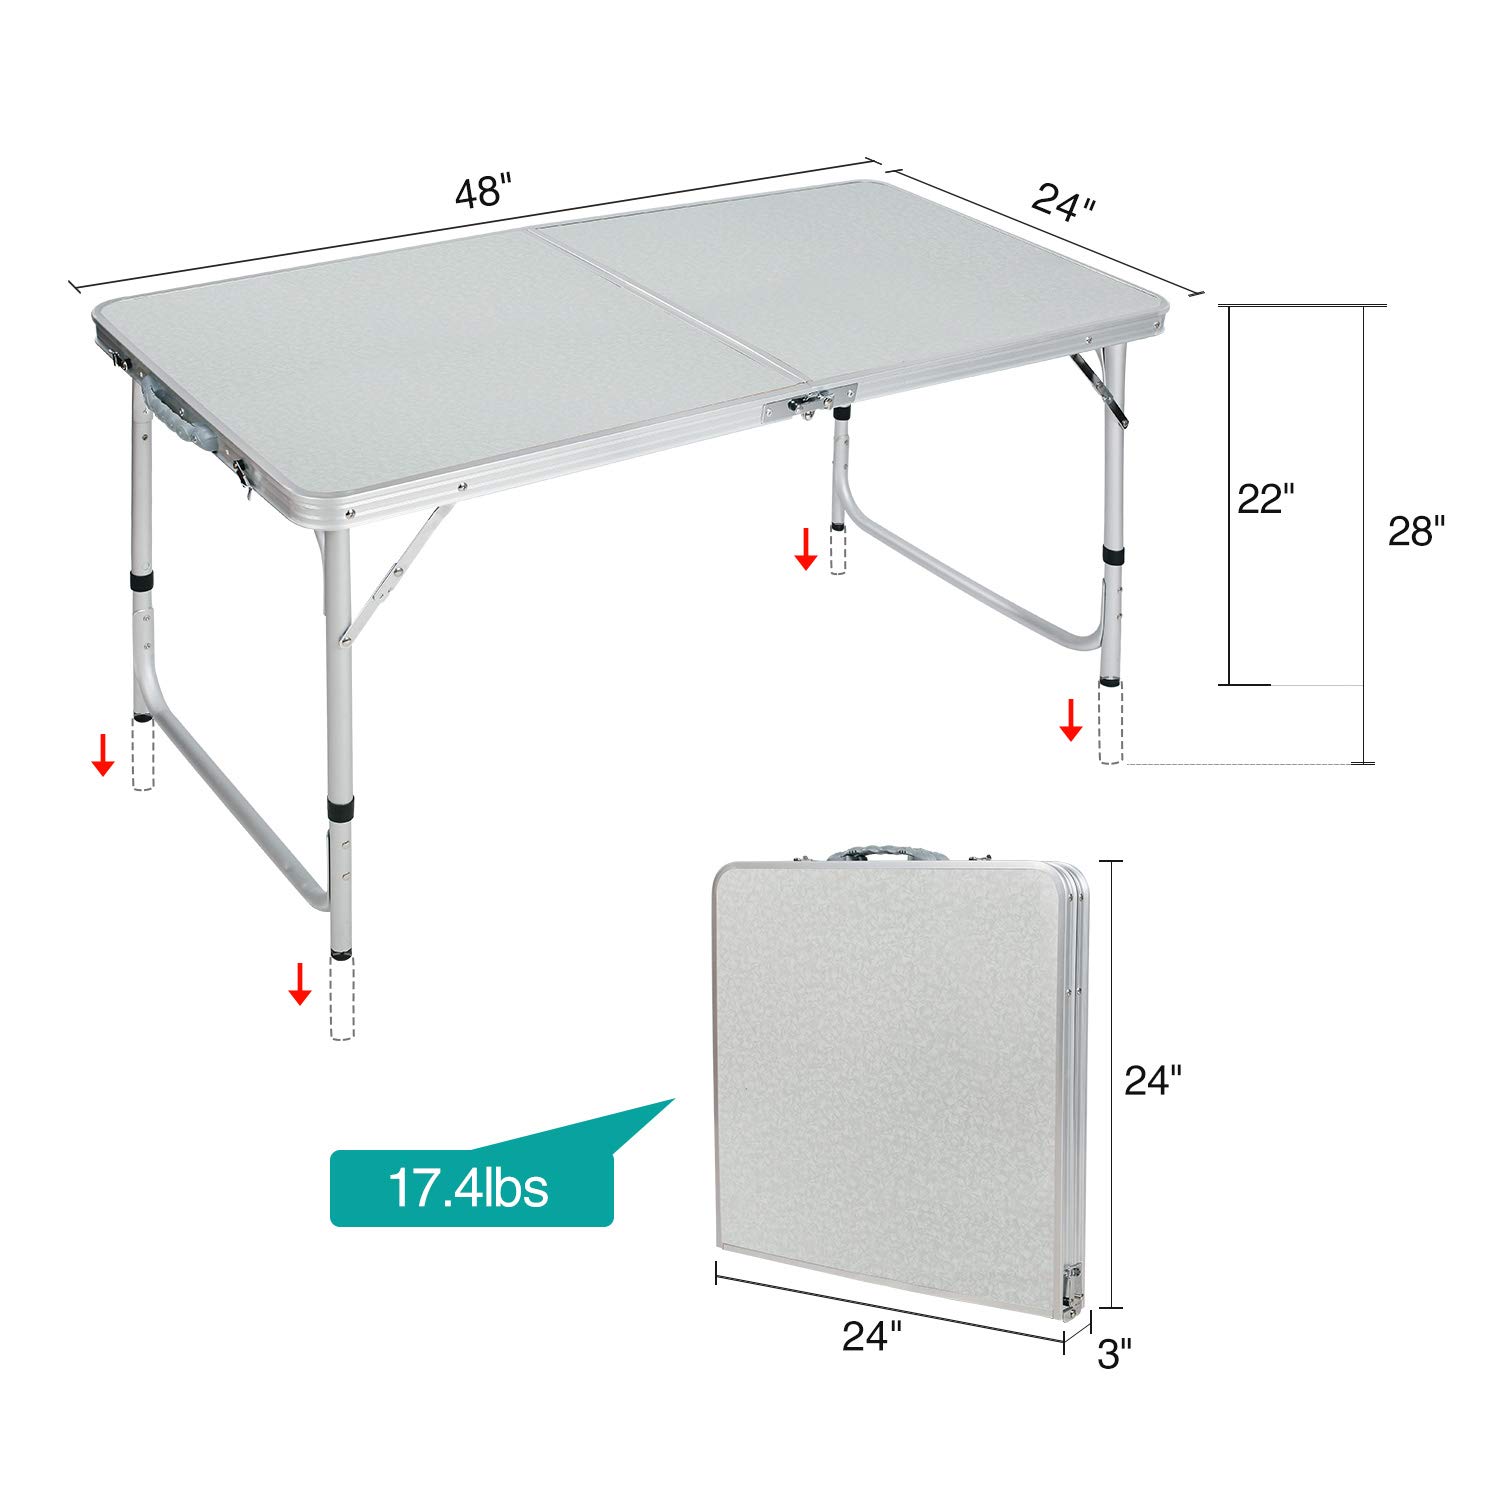 CAMPMOON Folding Camping Table 4 Foot, Lightweight Portable Aluminum Folding Table with Adjustable Legs, Great for Outdoor Cooking Picnic, White